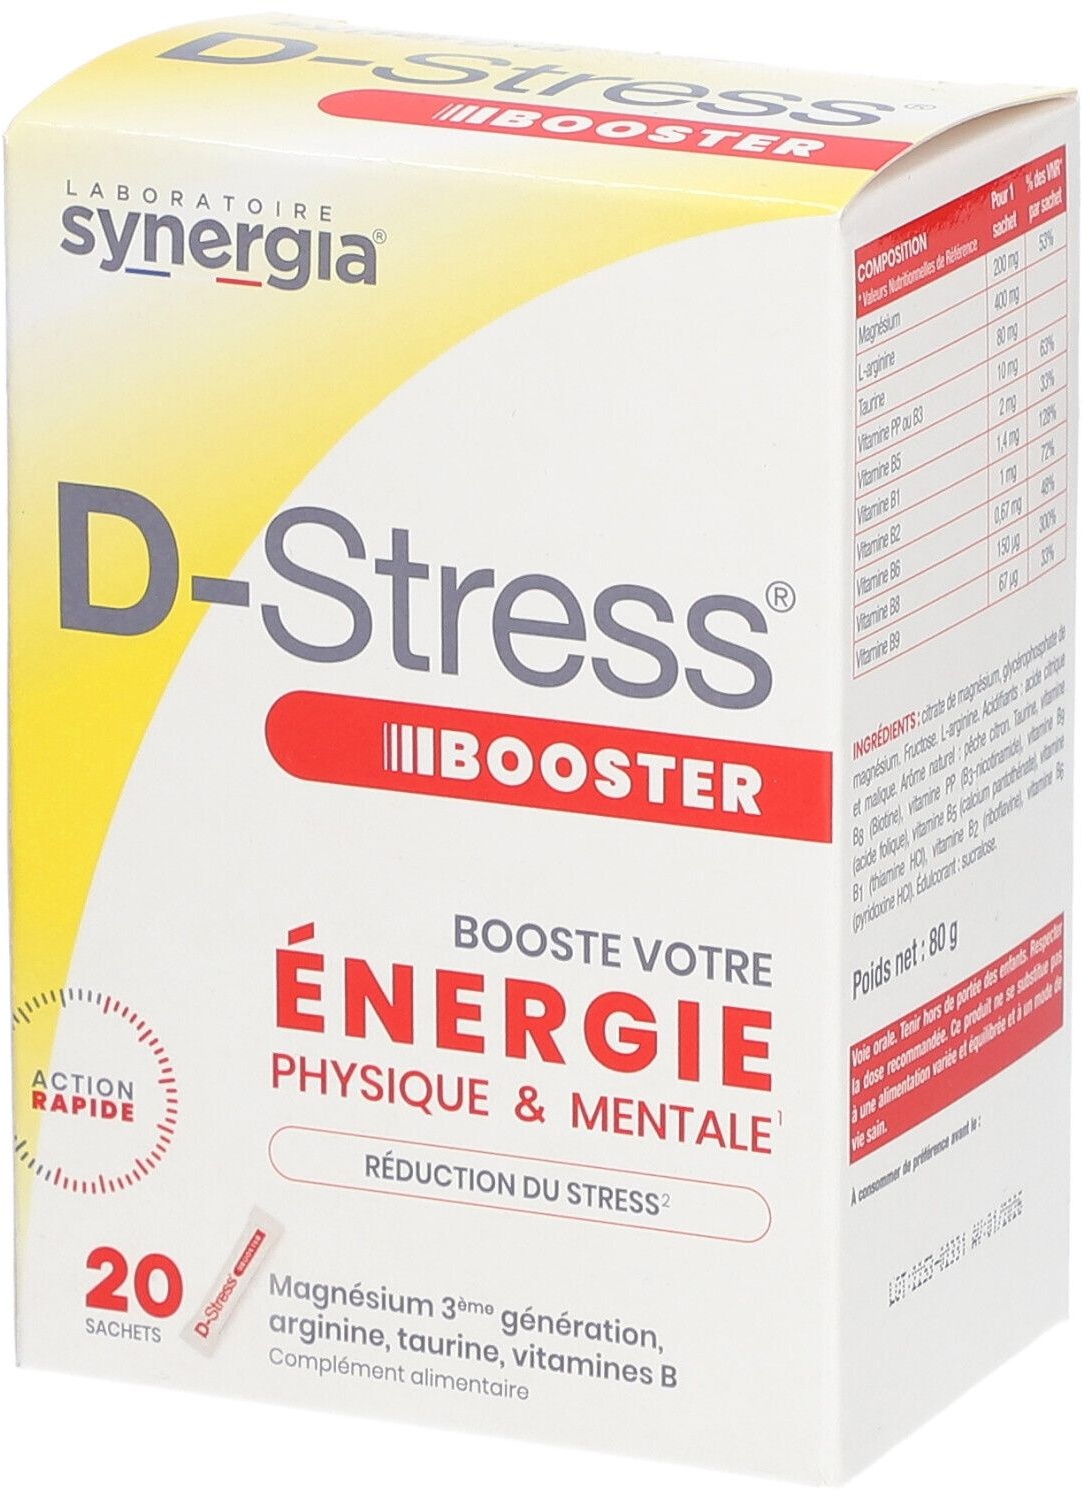 Synergia® D-Stress booster 20 pc(s) sachet(s)